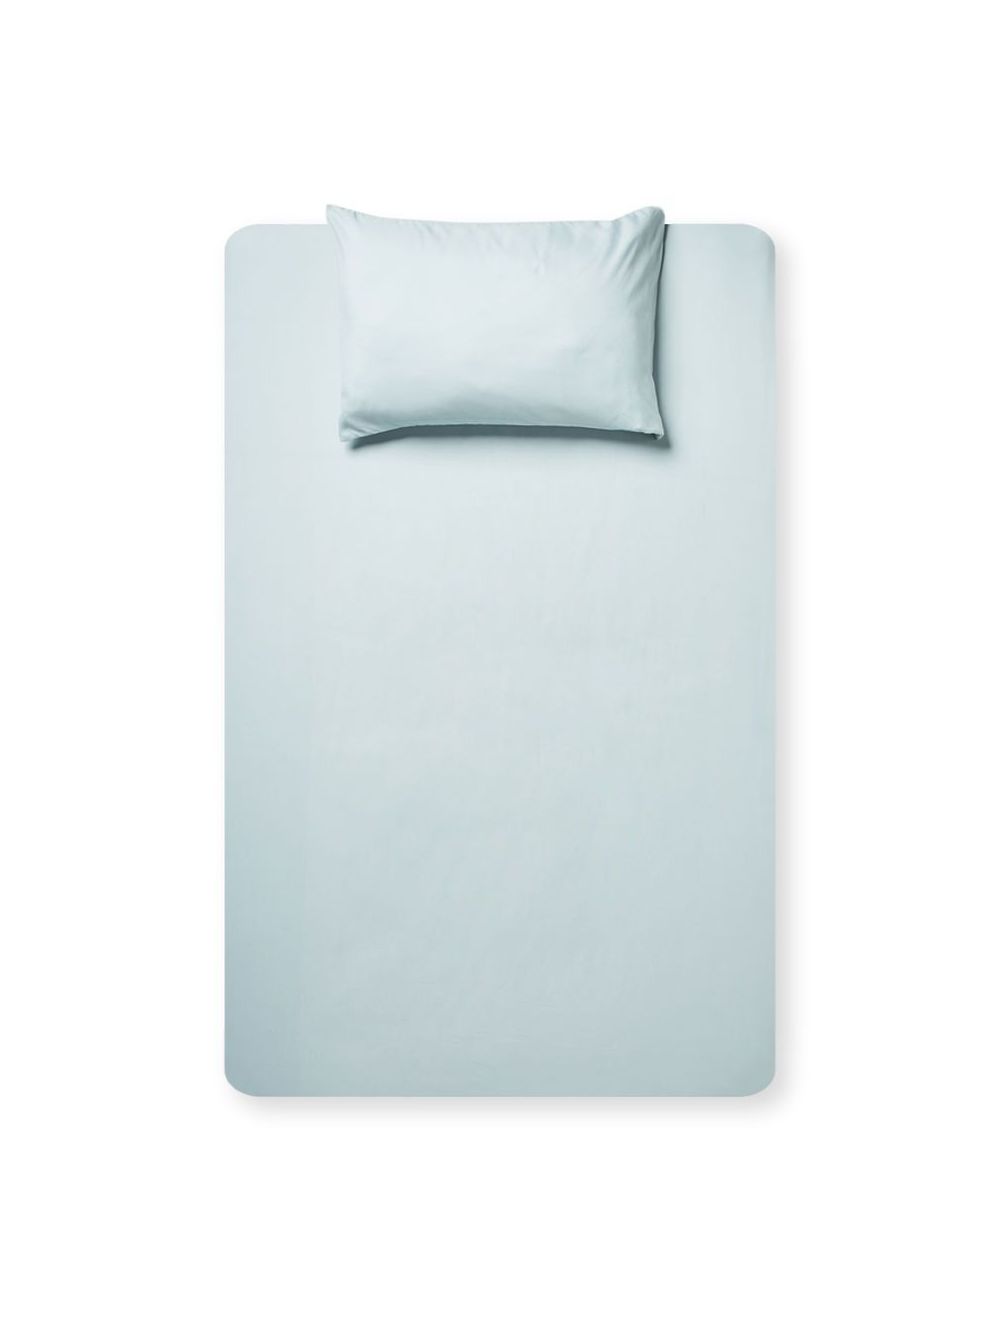 Rahalife 2 Piece Baby Blue Coloured  Microfiber Fitted Bedsheet Set Twin Size ( 1 Fittedsheet + 1 Pillow Case)-4BSMTB1040